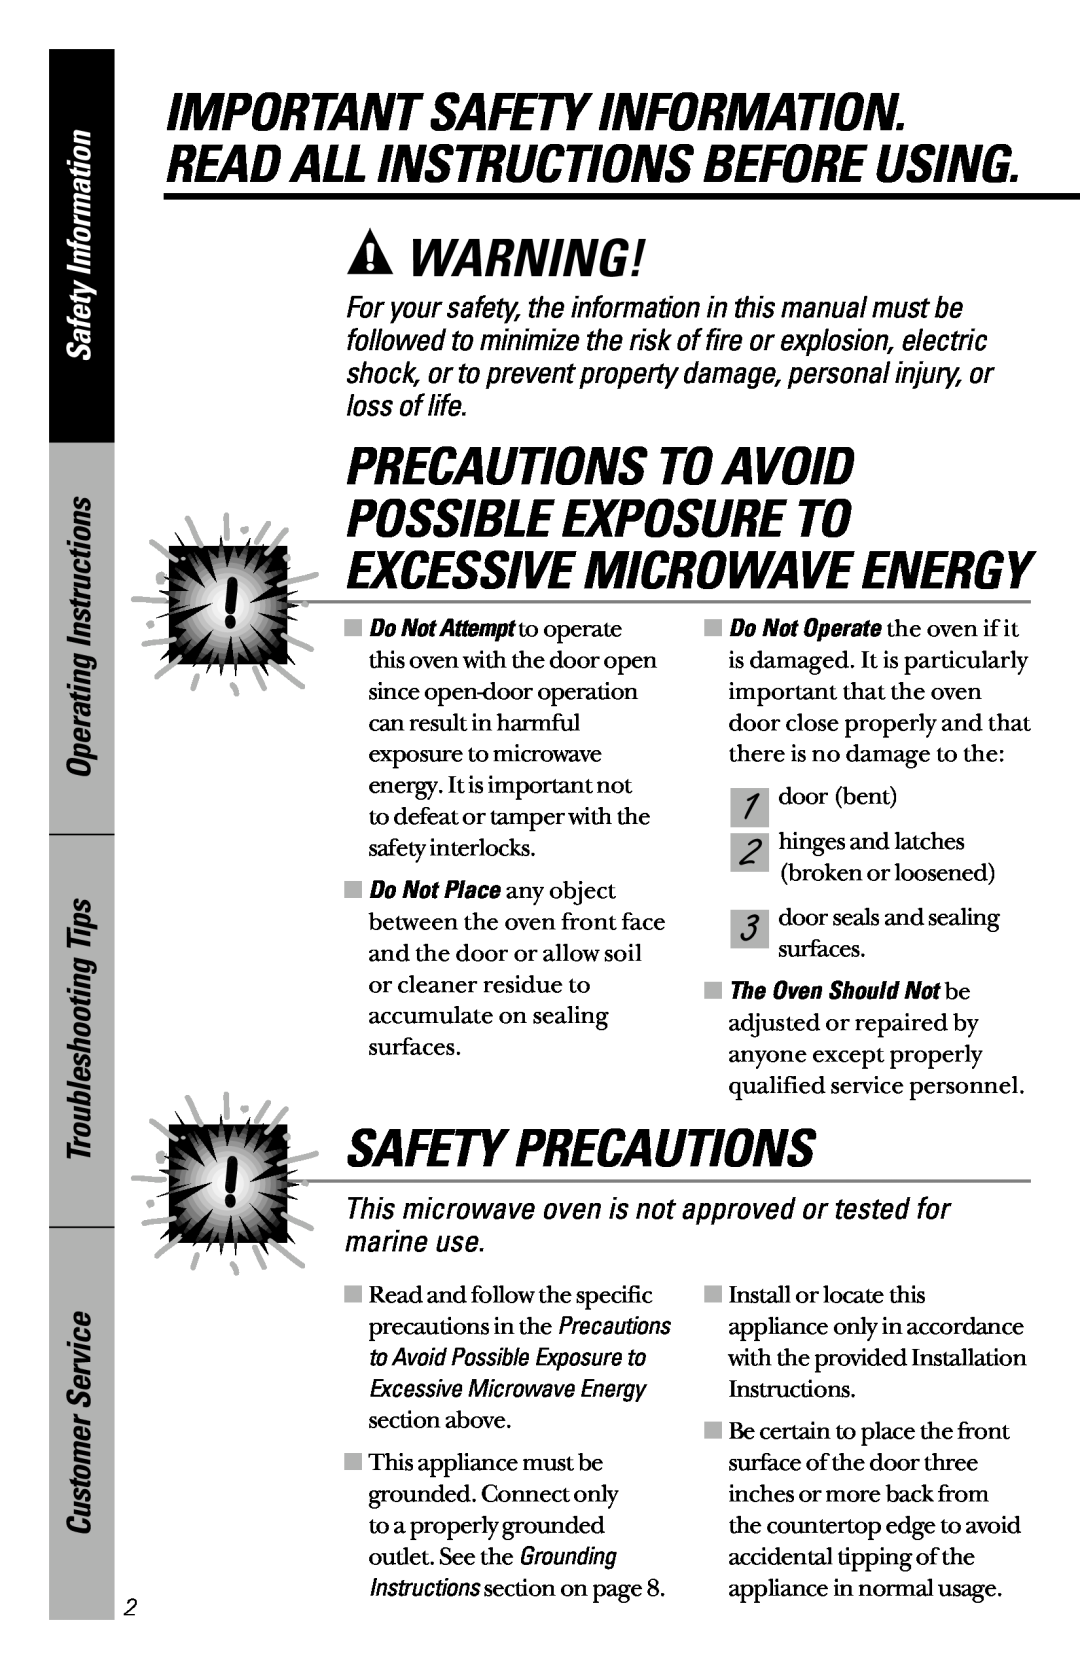 GE JE1340WC Precautions To Avoid, Safety Precautions, Important Safety Information. Read All Instructions Before Using 